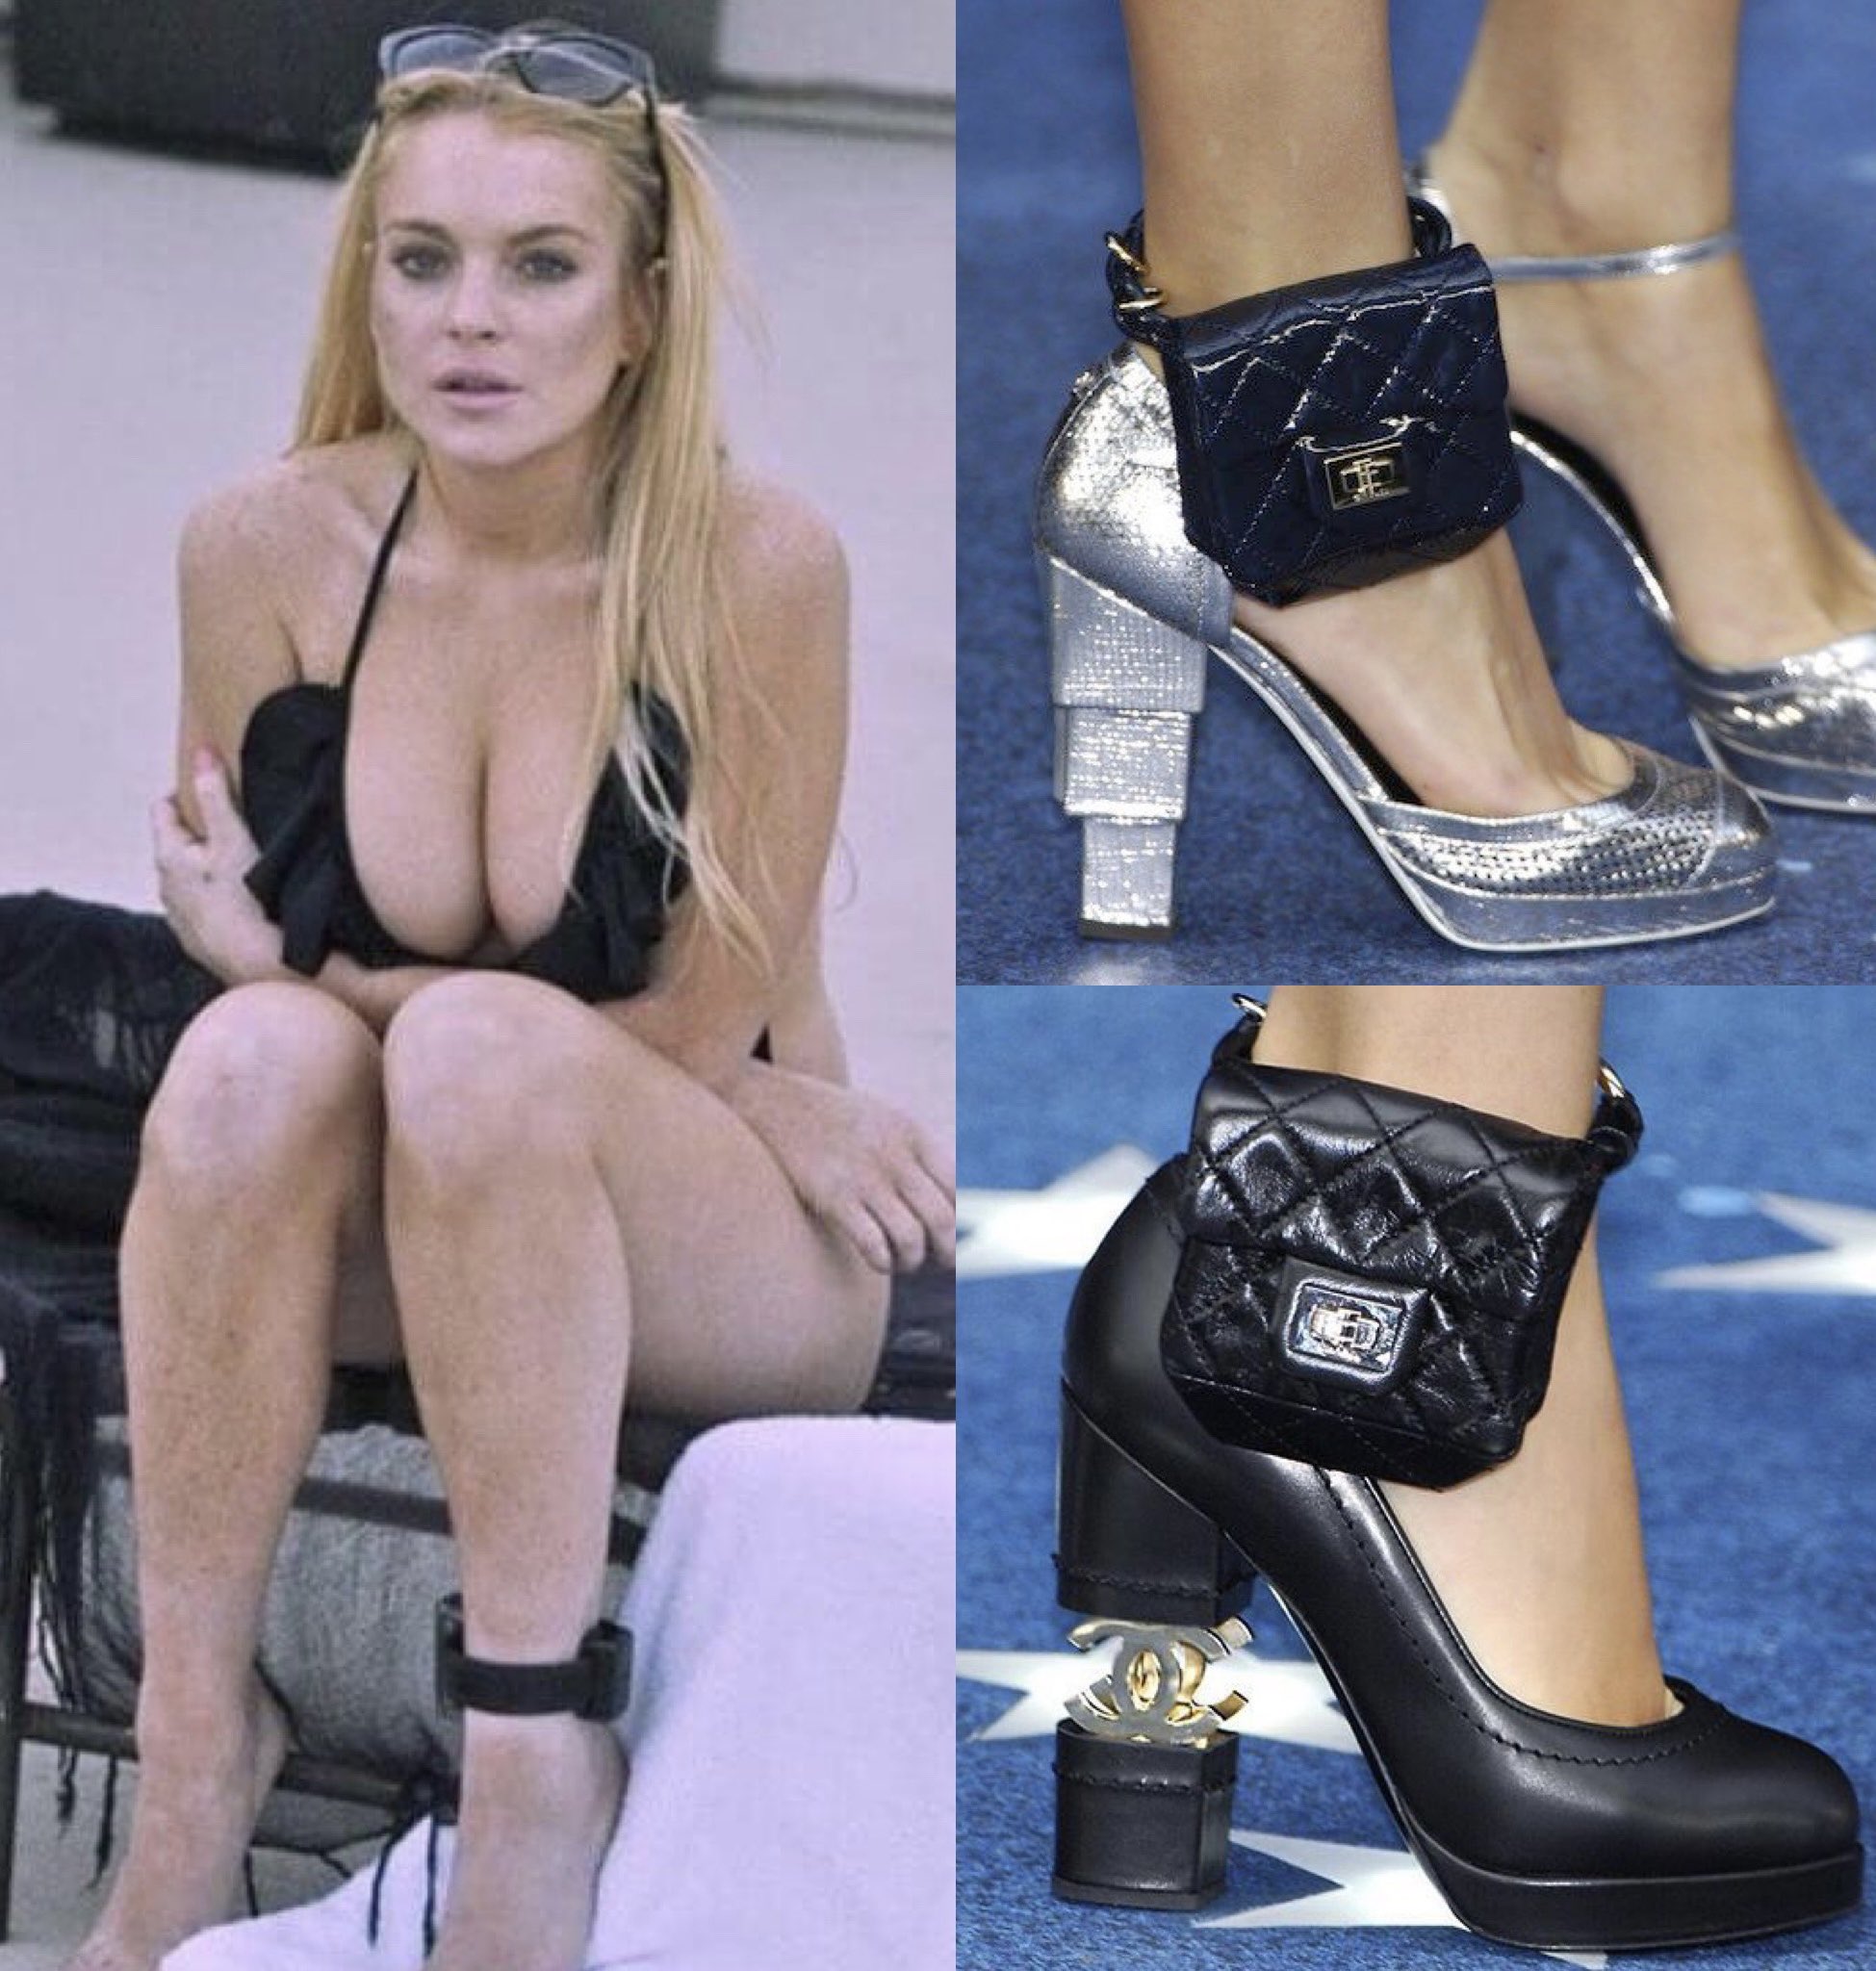 CHANEL Spring/Summer 2008 ankle bags inspired by Lindsay Lohan's 2007  alcohol monitoring ankle bracelet